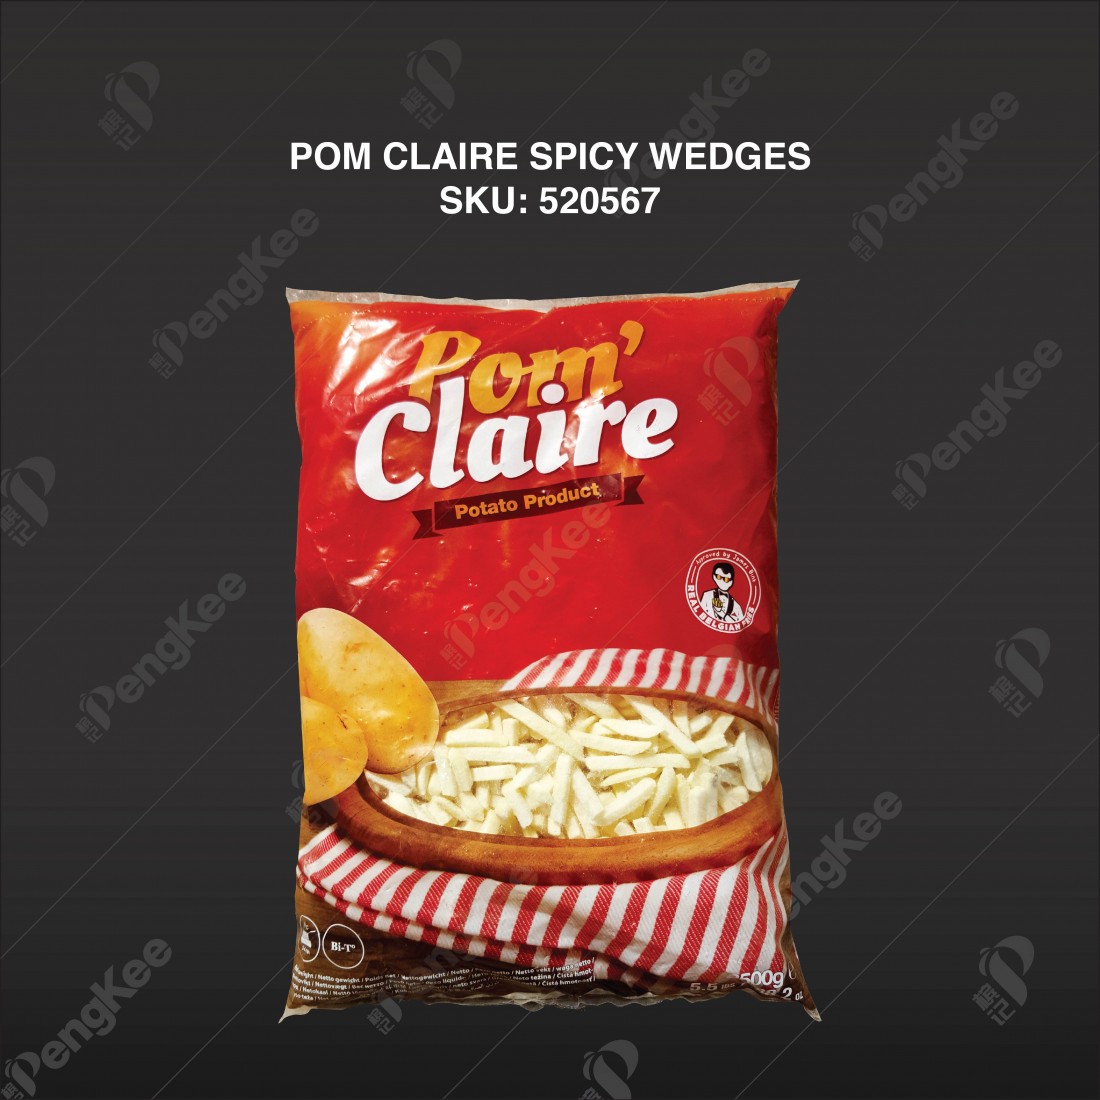 POM CLAIRE SPICY WEDGES (1KG)